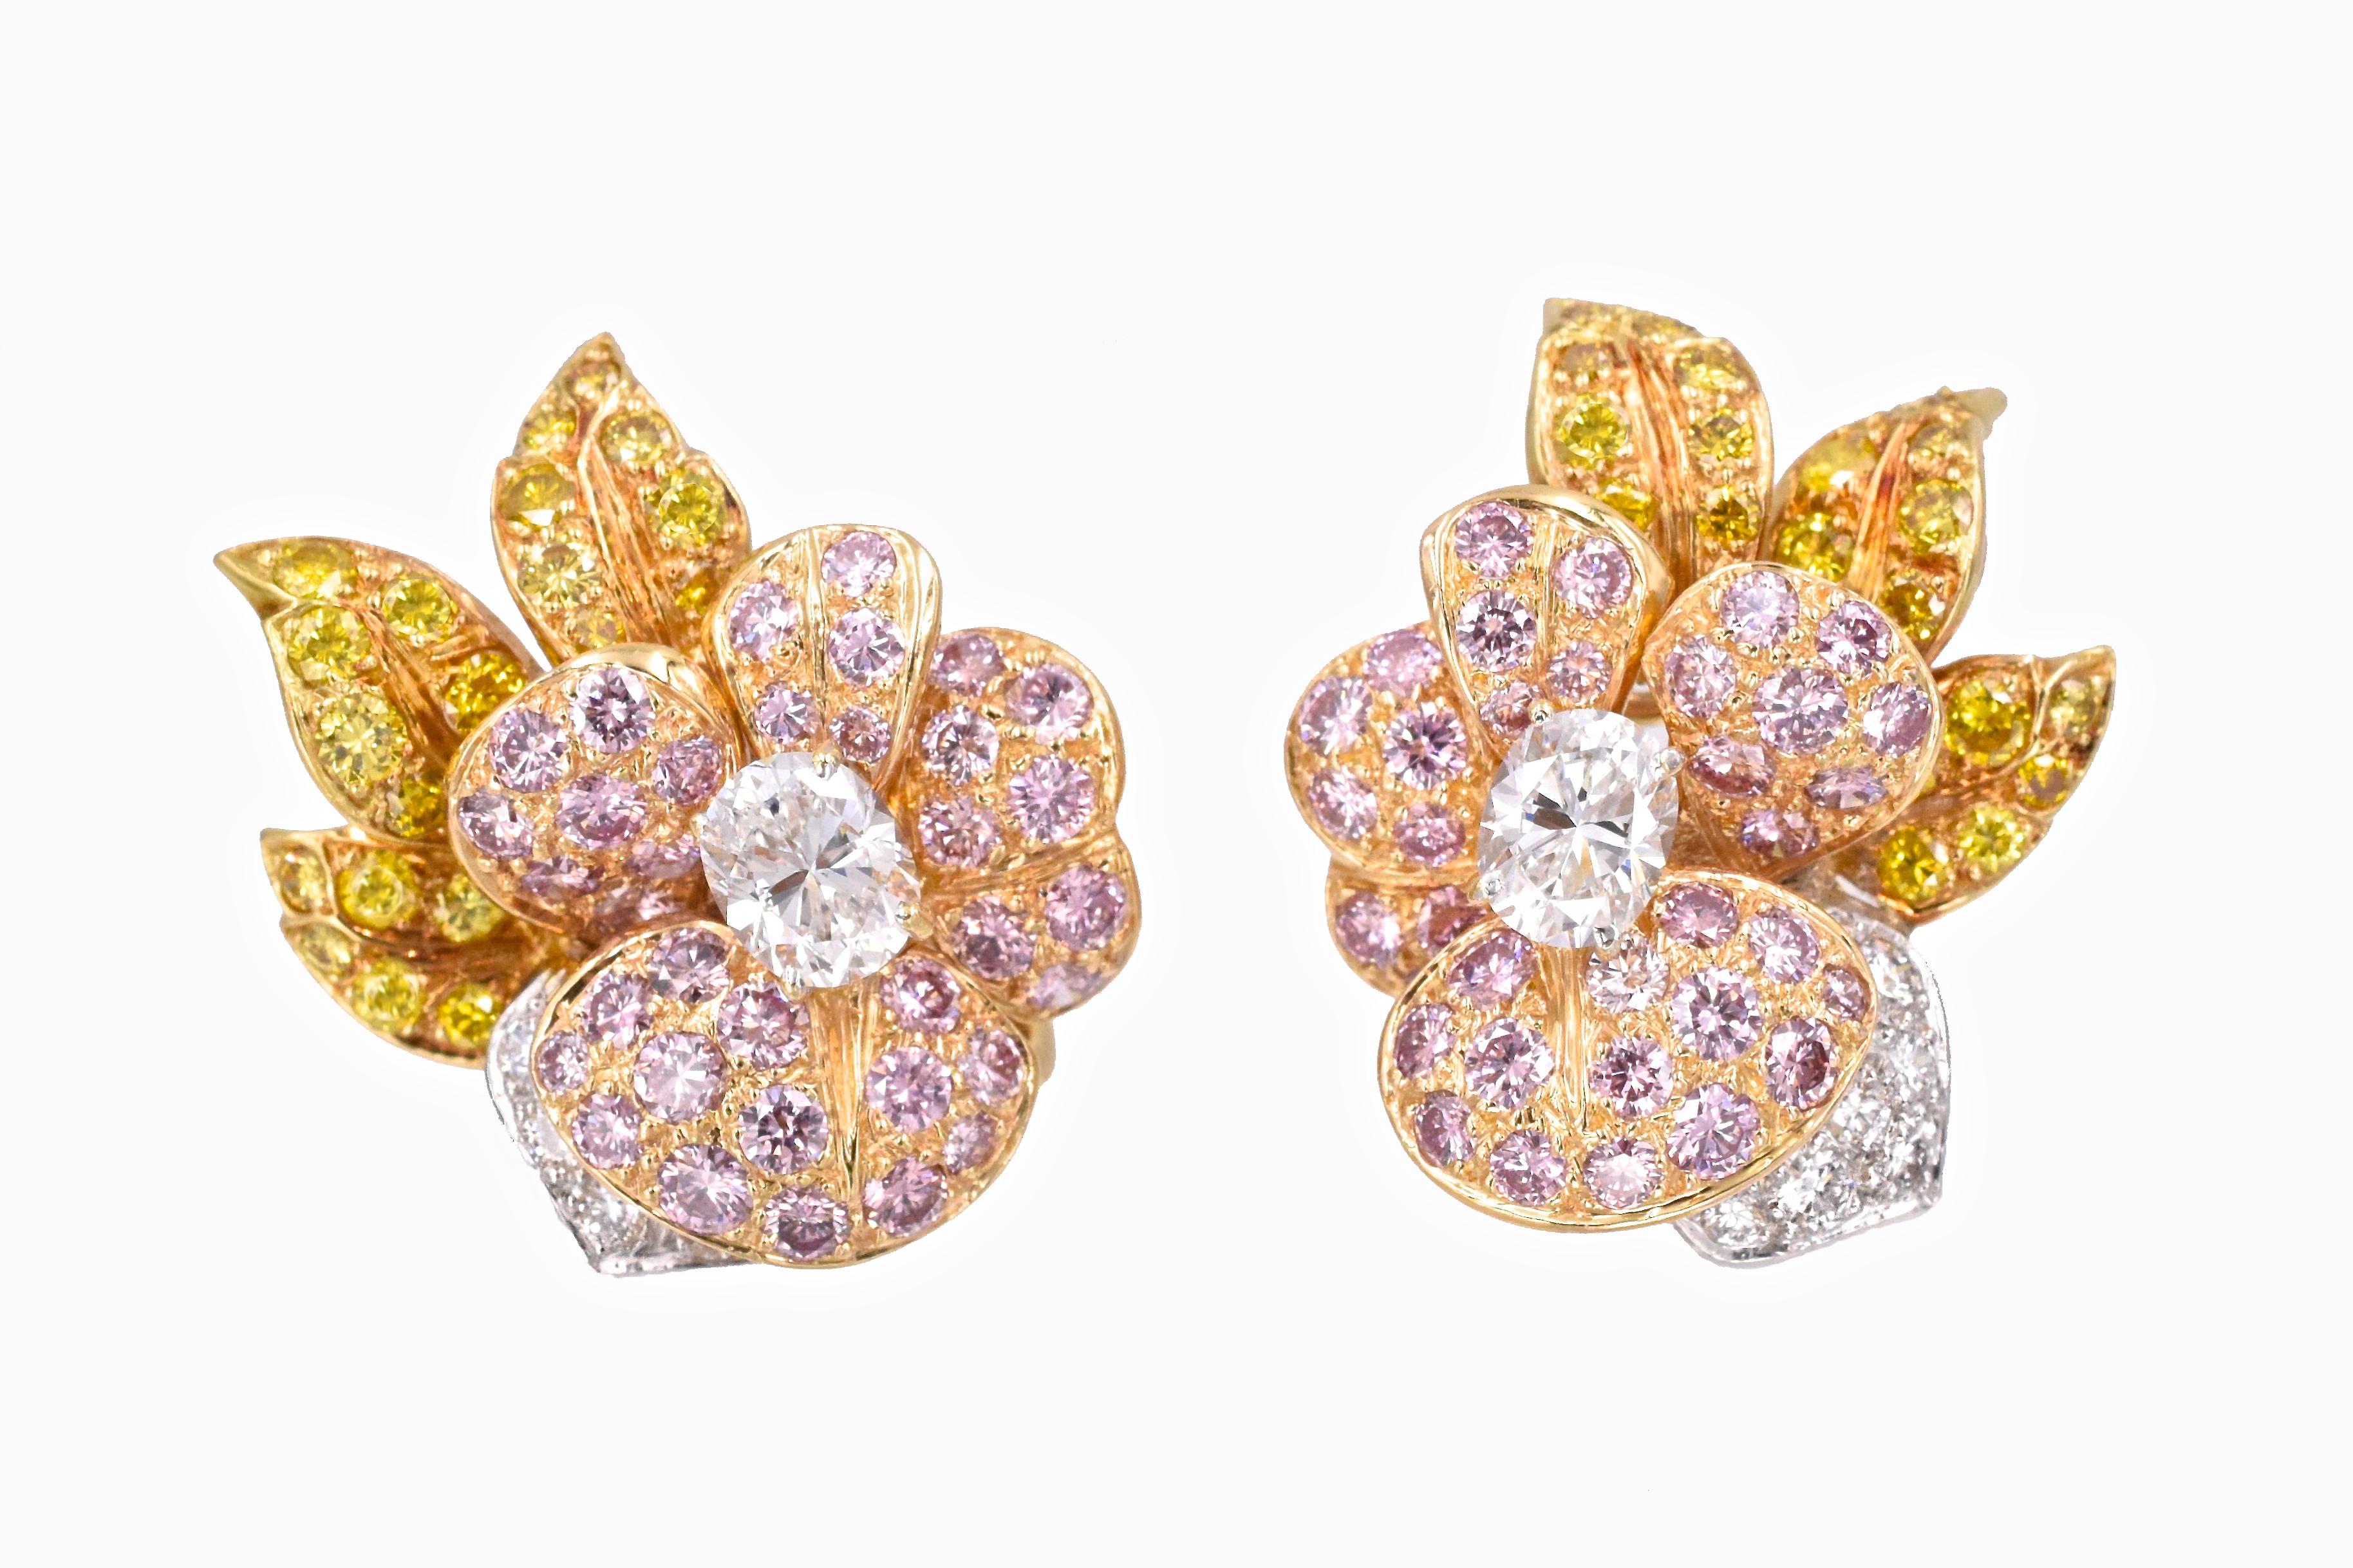 Beautiful floral ear clips by GRAFF 
 2 center oval  diamonds  are   1.20 carats E/F color VS1 clarity
40 Natural yellow  diamonds  are  2.0 carats set in yellow gold
70 Natural pink diamonds  are   3.0 carats set in pink gold
12 Natural white